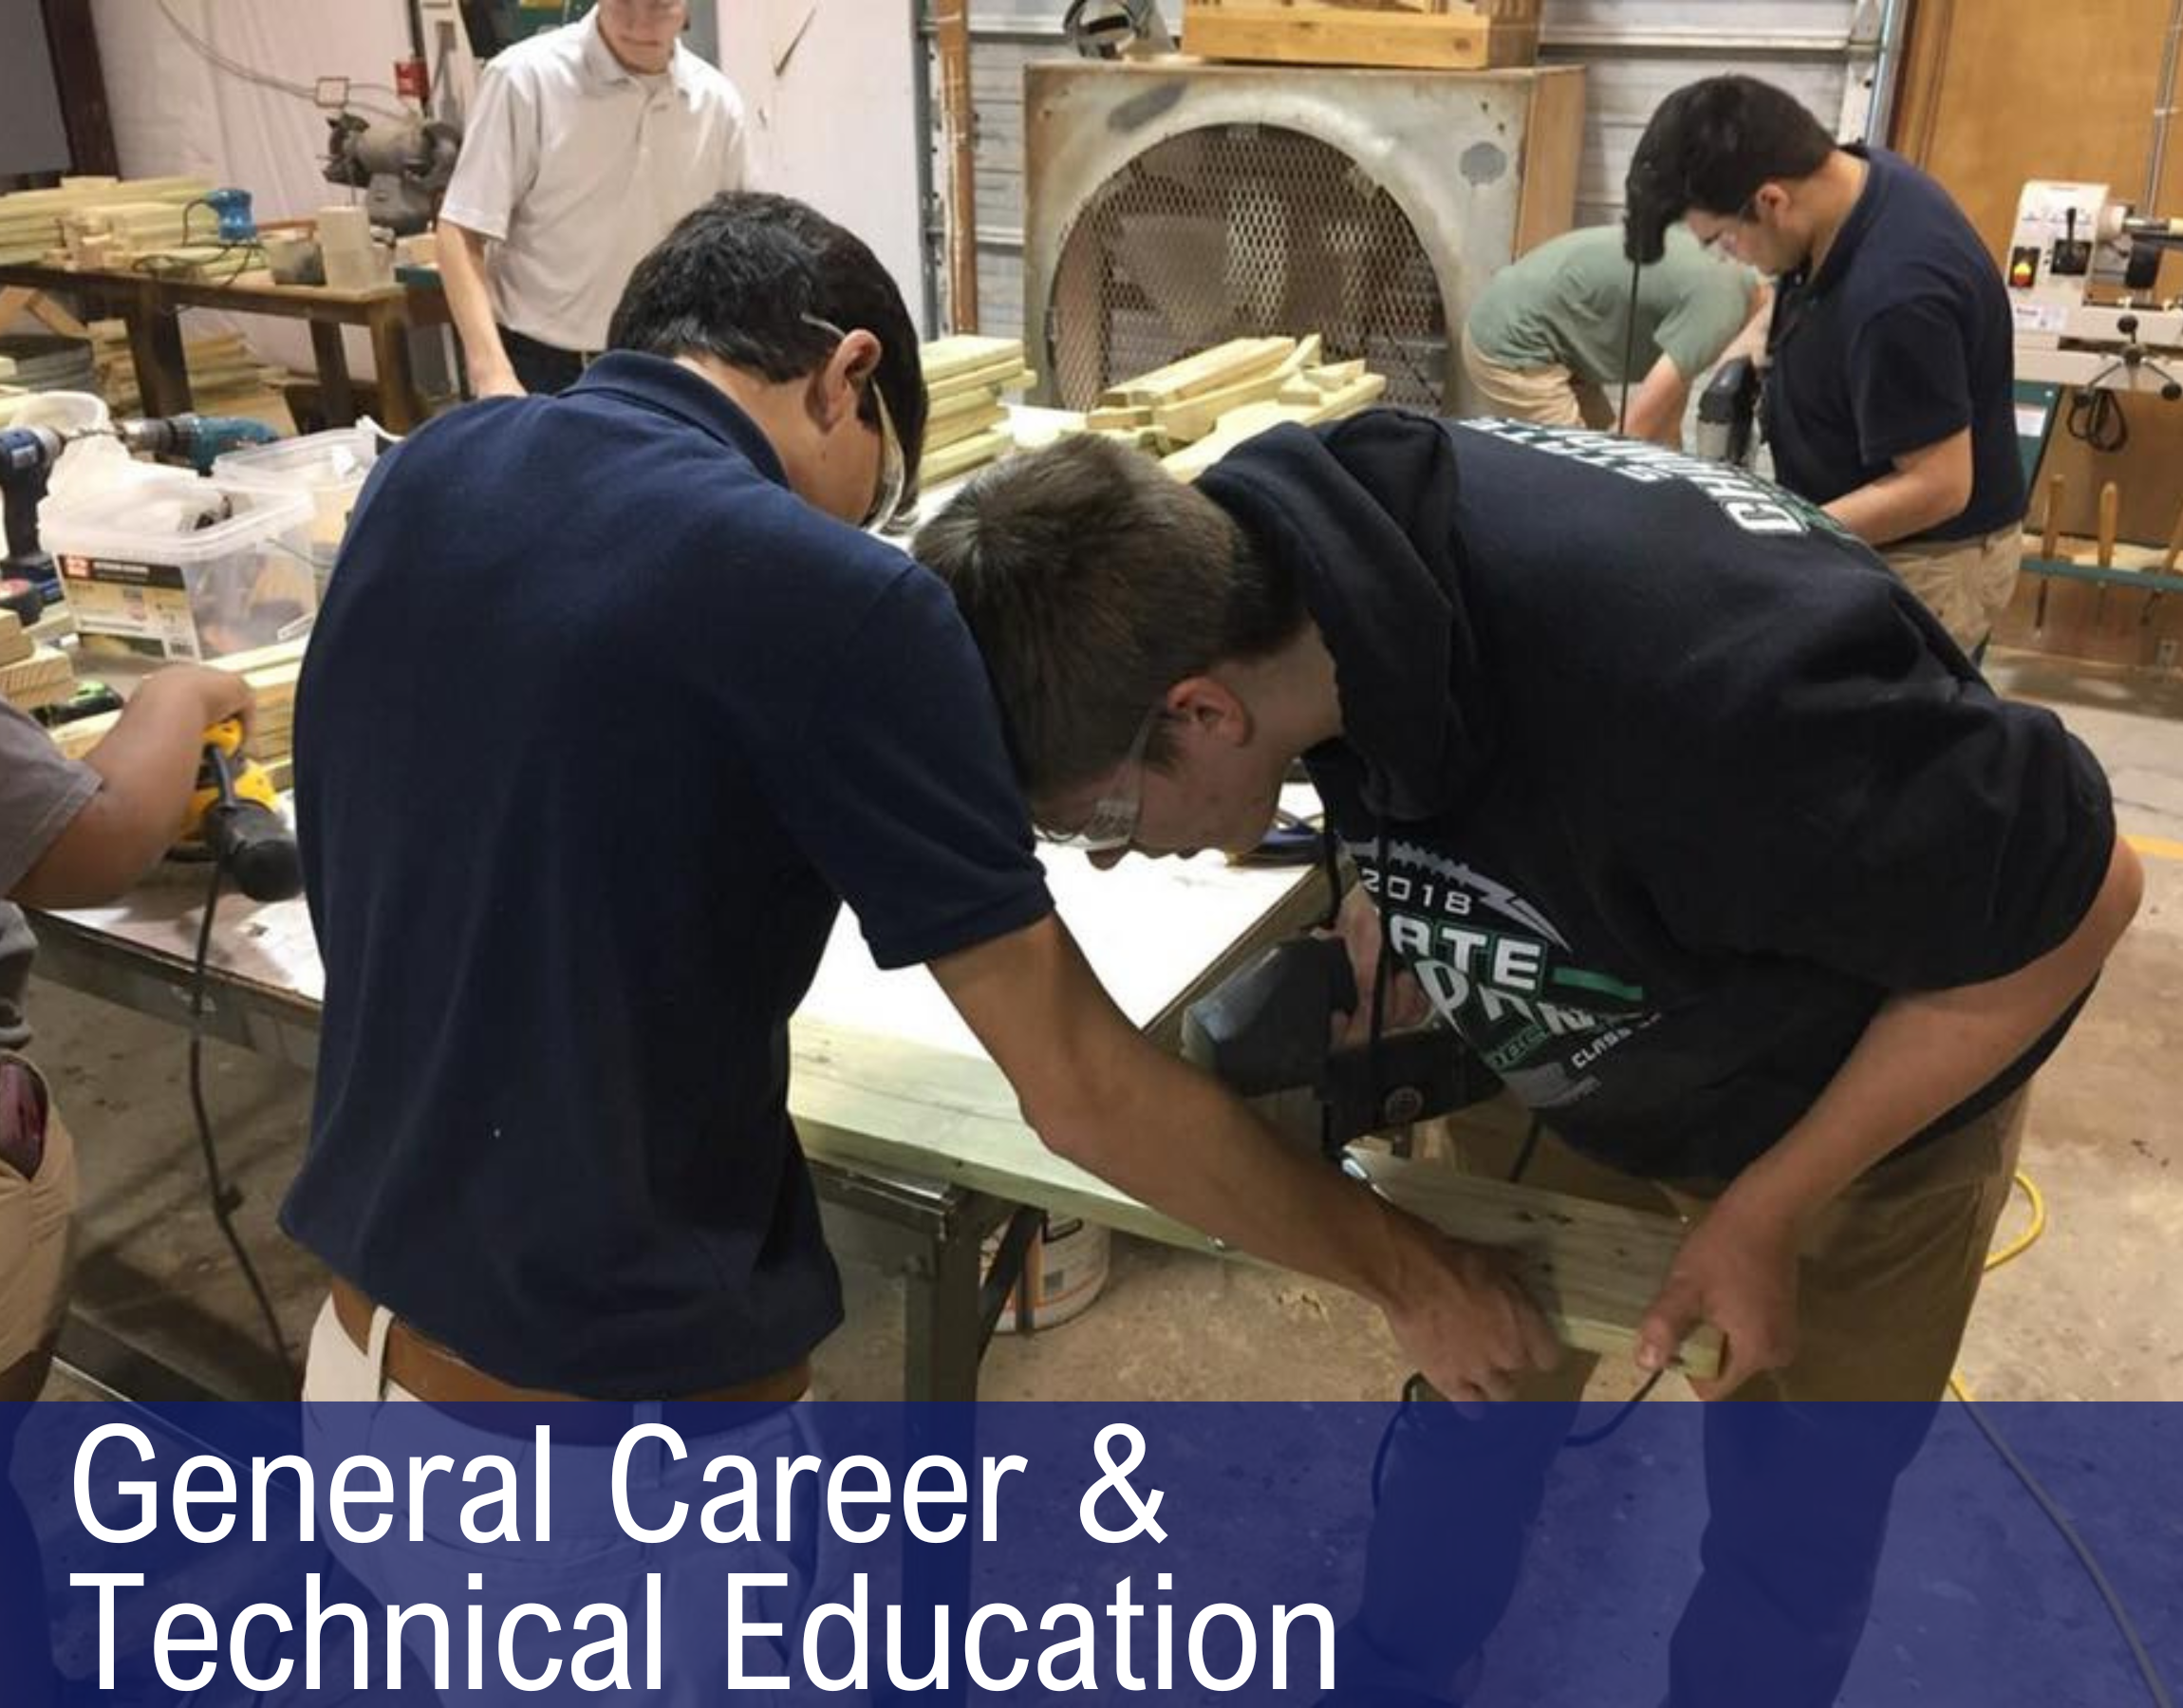 GENERAL CAREER AND TECHNICAL EDUCATION